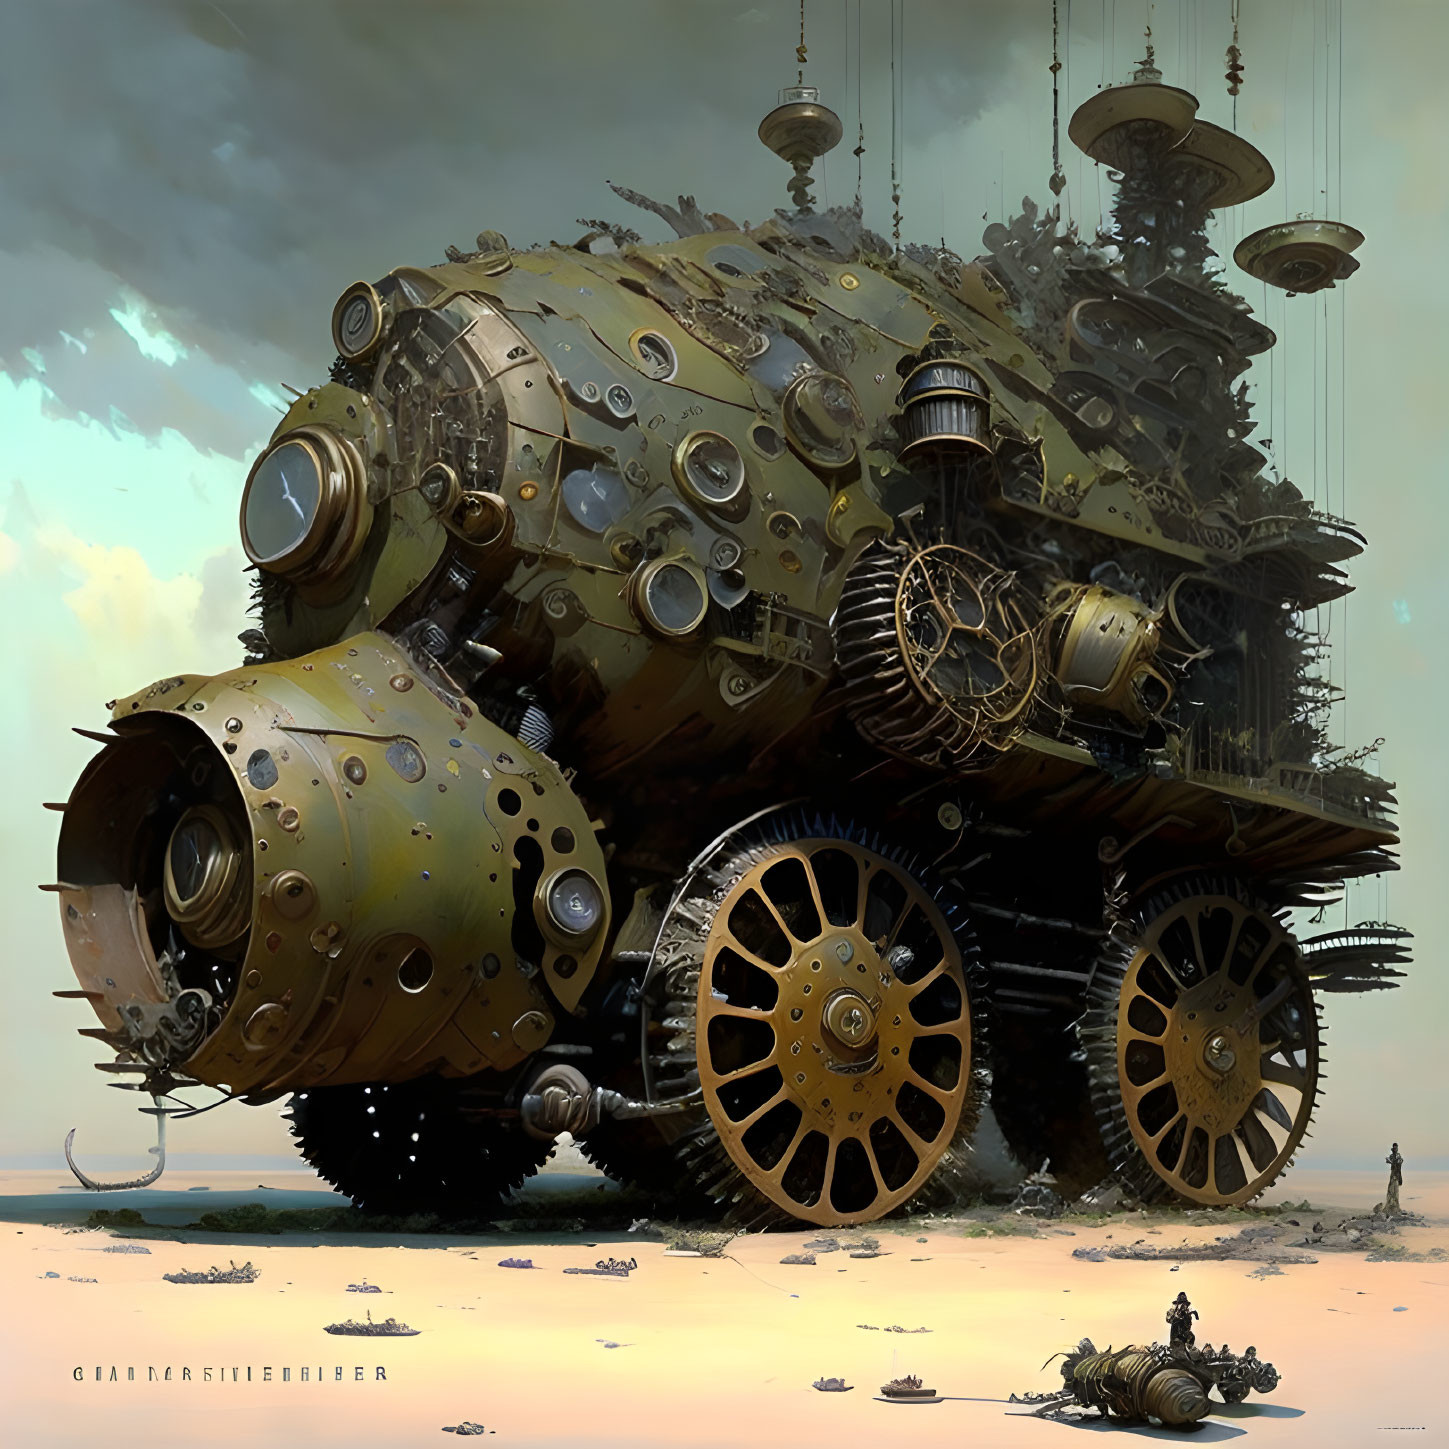 Steampunk-style vehicle with gears and wheels in desolate landscape